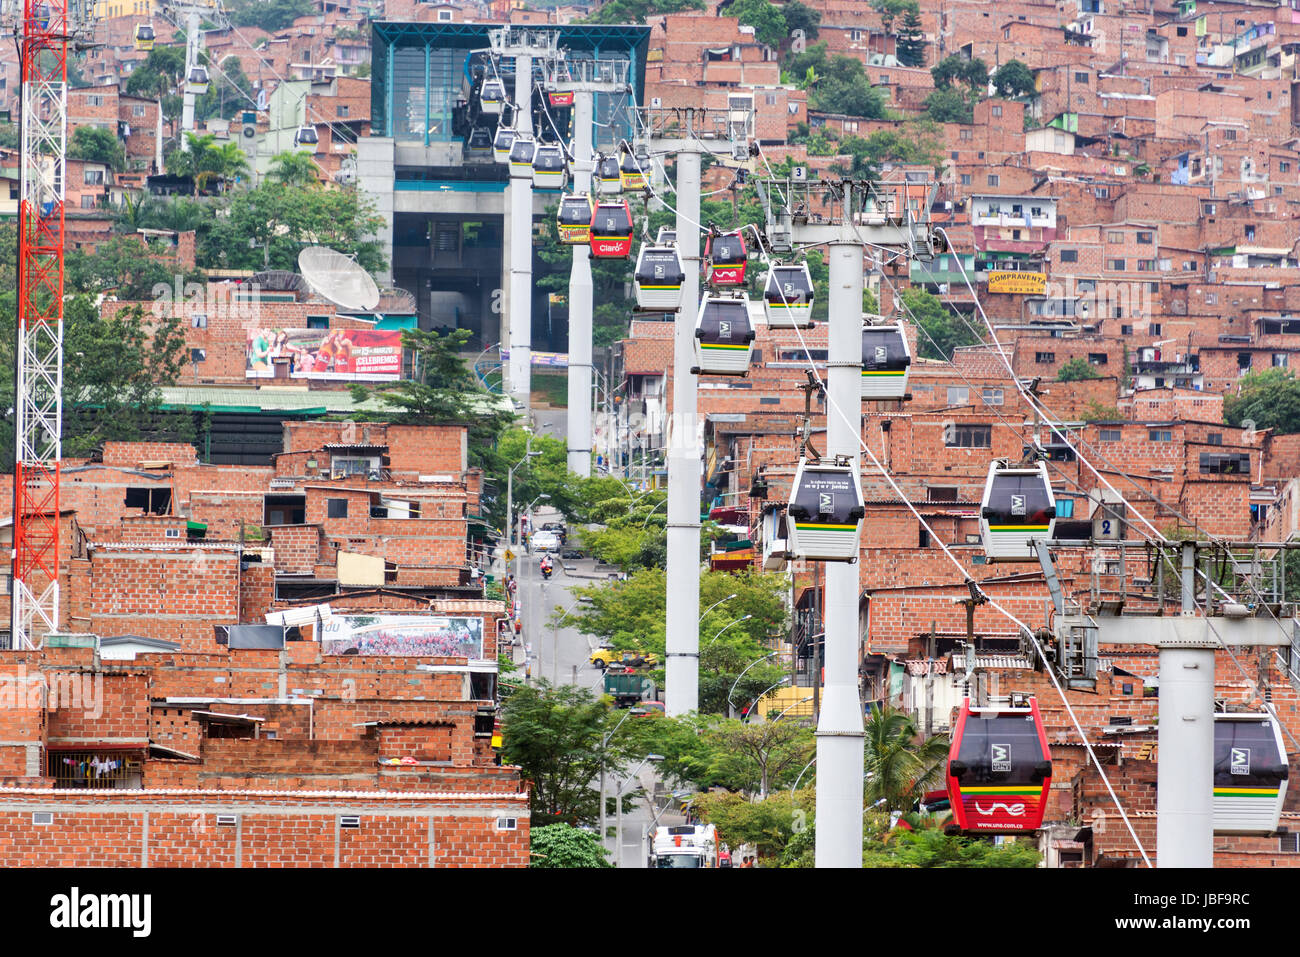 MEDELLIN, COLOMBIA - MARCH 8: Metrocable cars arriving at a station in Medellin, Colombia on March 8, 2014.  Metrocable is the first gondola lift system in the world dedicated to public transportation. Stock Photo